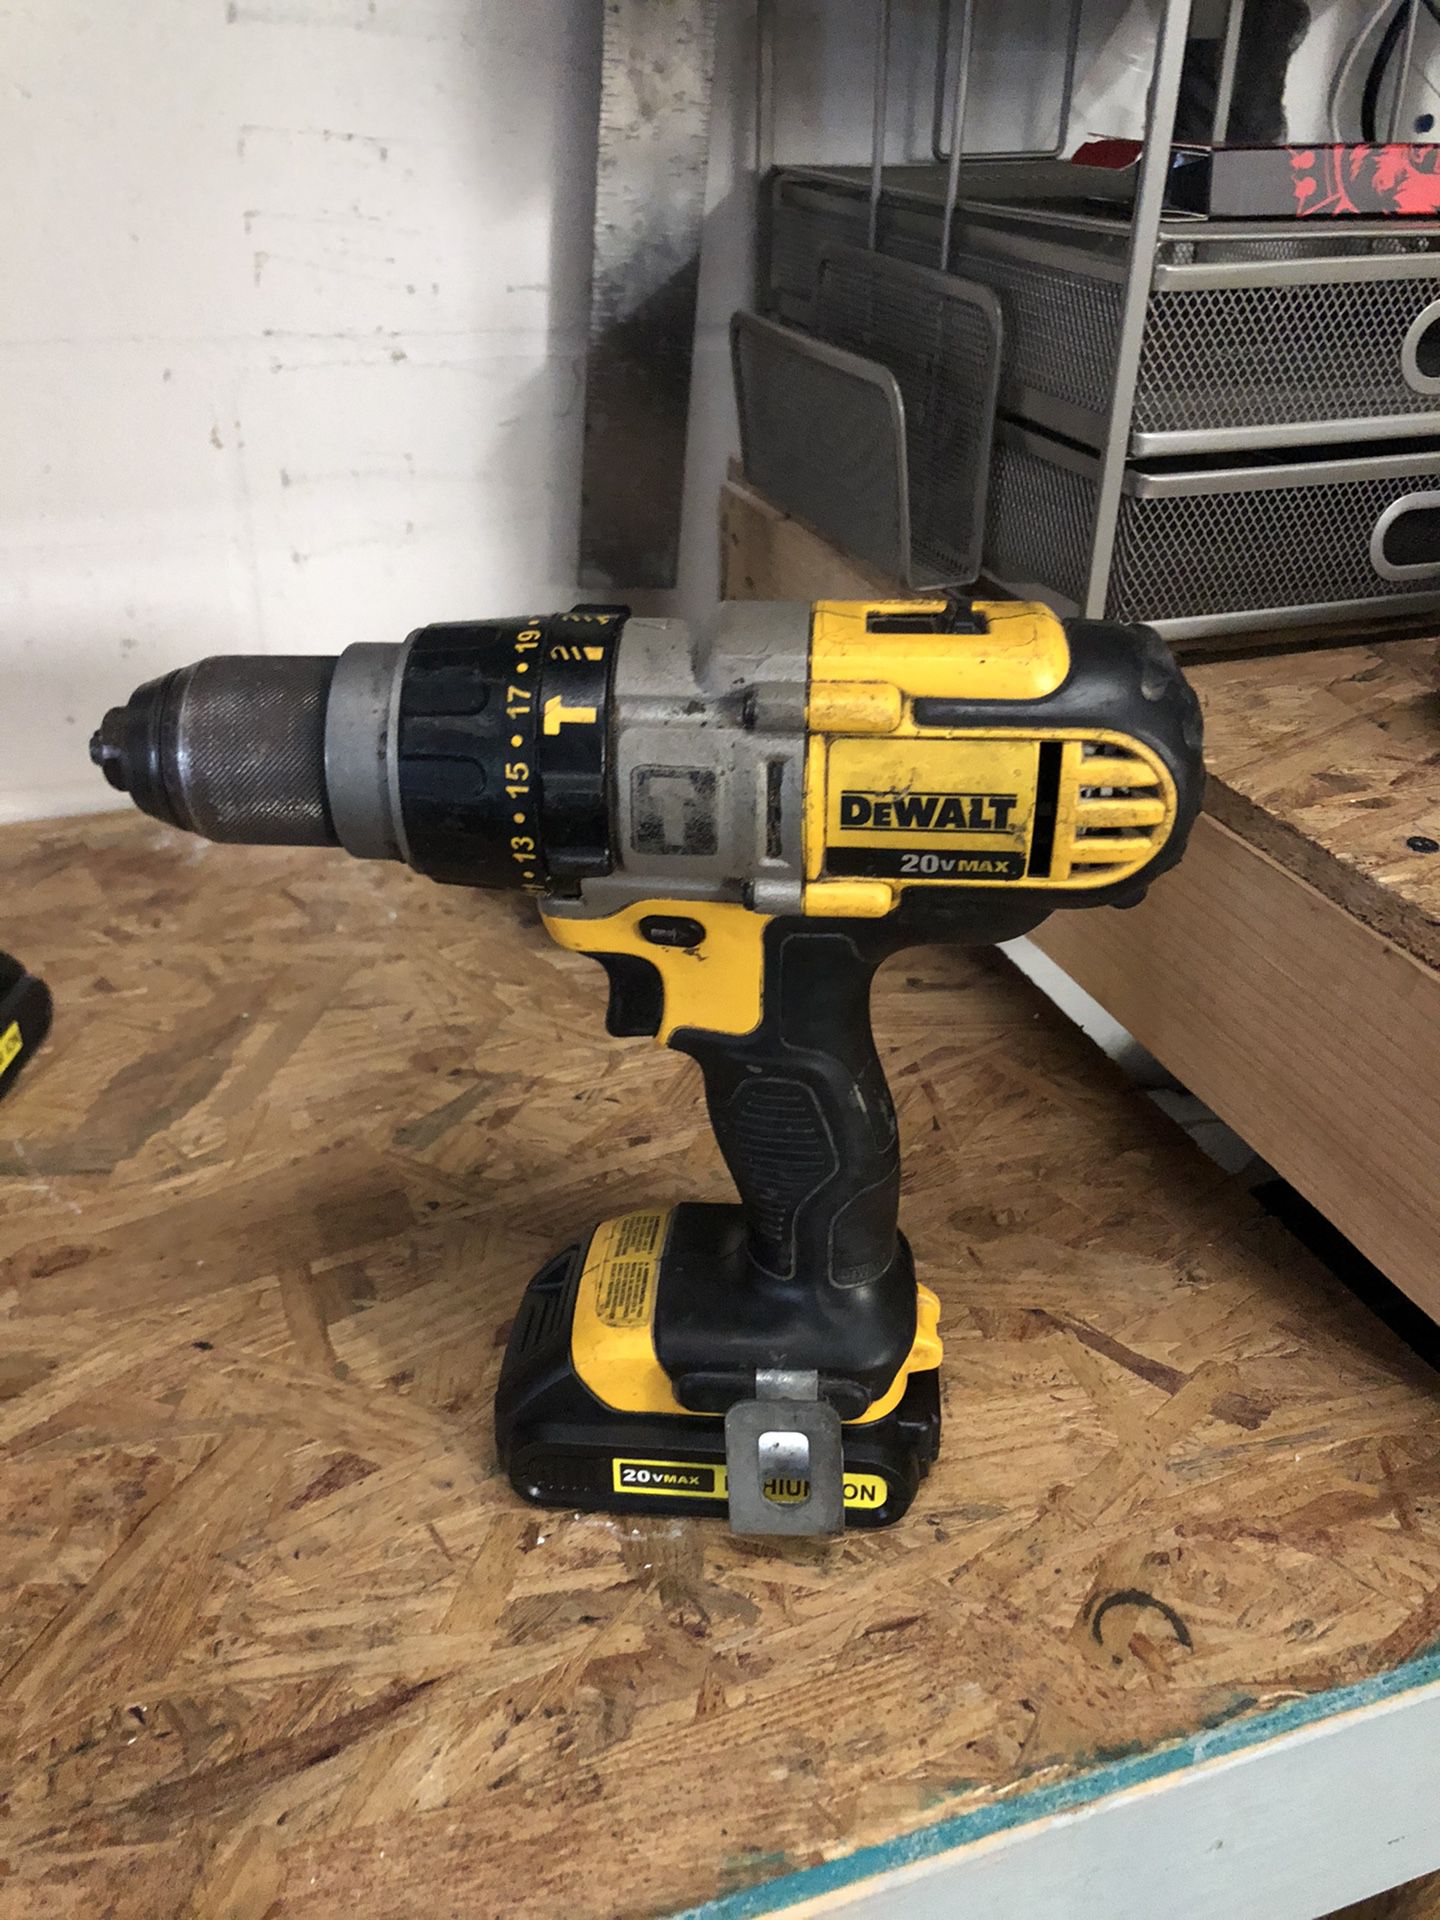 DeWalt 20v Max 1/2 hammer drill with 3.0 ah battery, charger.